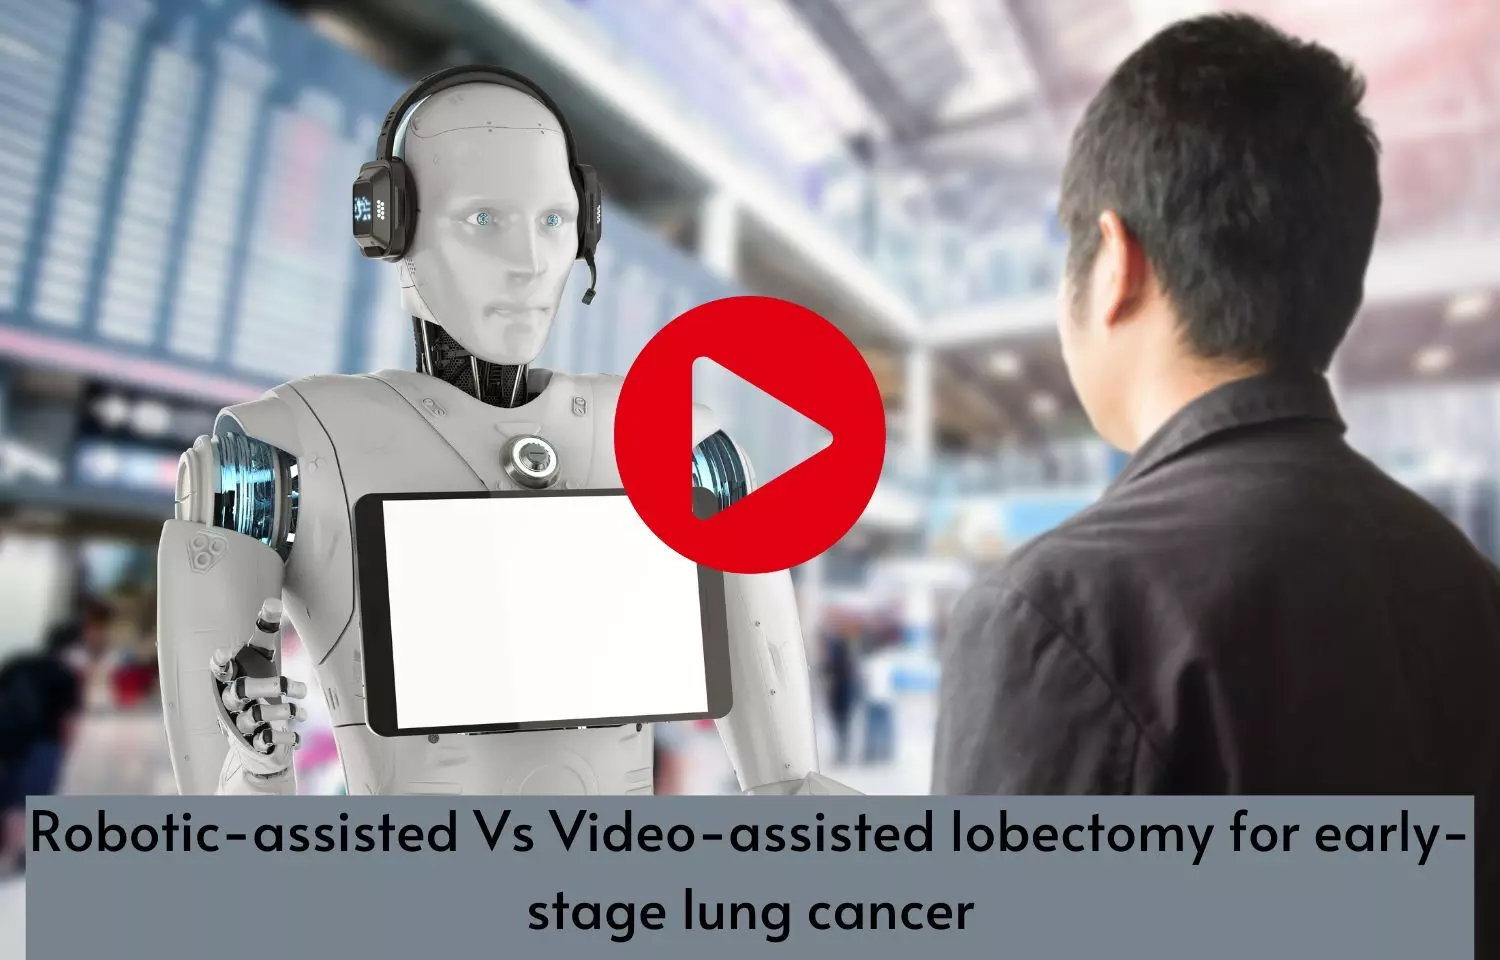 Robotic-assisted Vs Video-assisted lobectomy for early-stage lung cancer